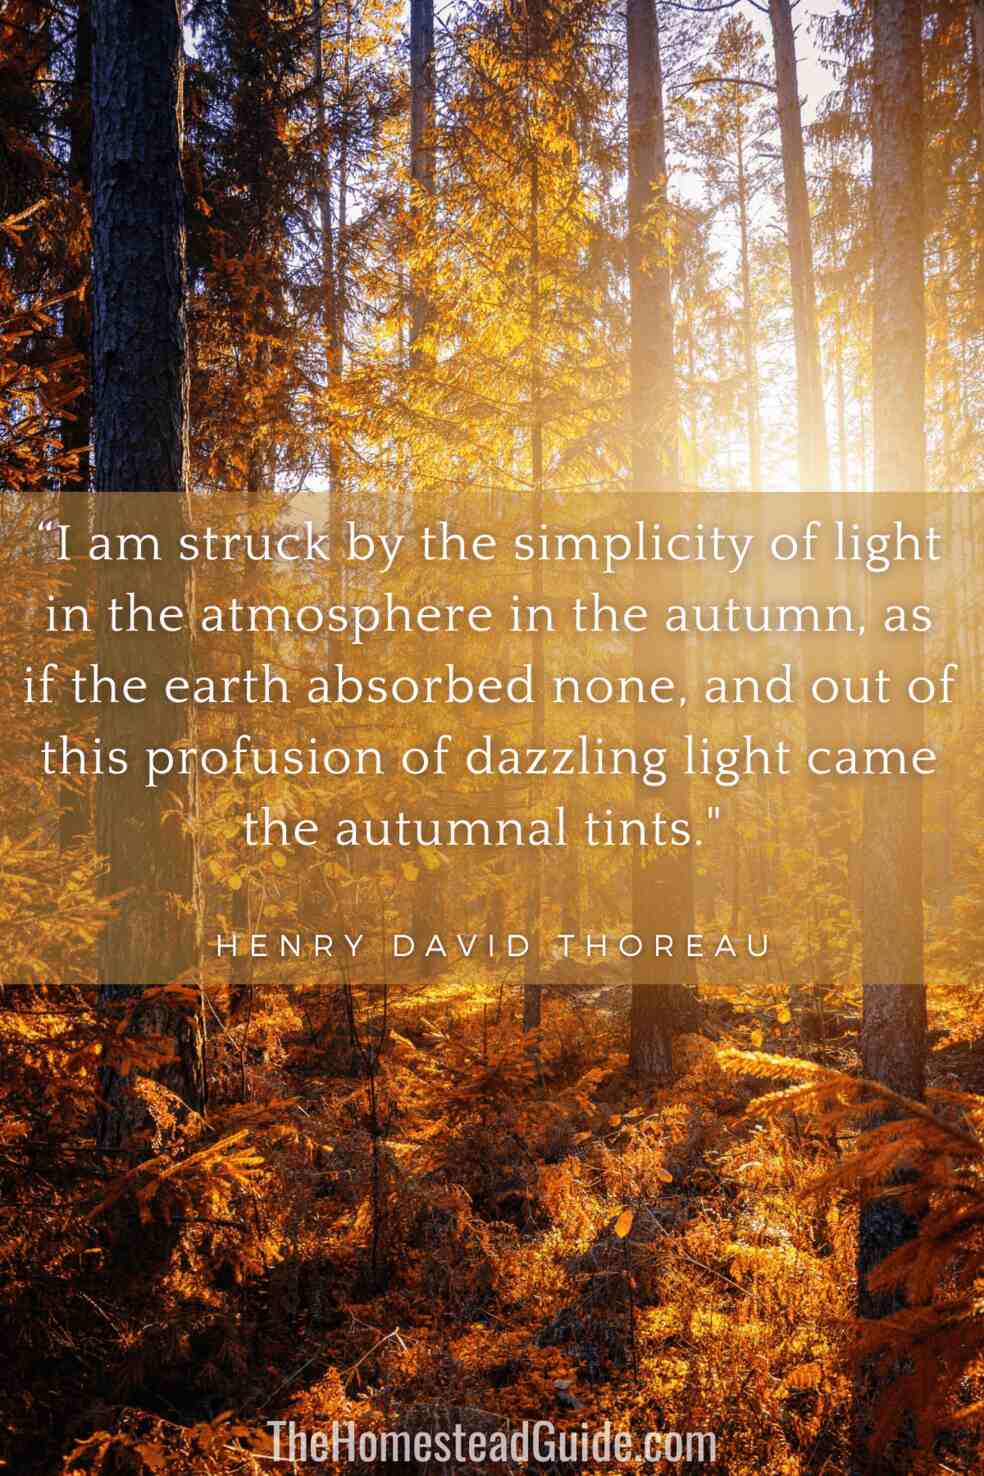 I am struck by the simplicity of light in the atmosphere in the autumn, as if the earth absorbed none, and out of this profusion of dazzling light came the autumnal tints.